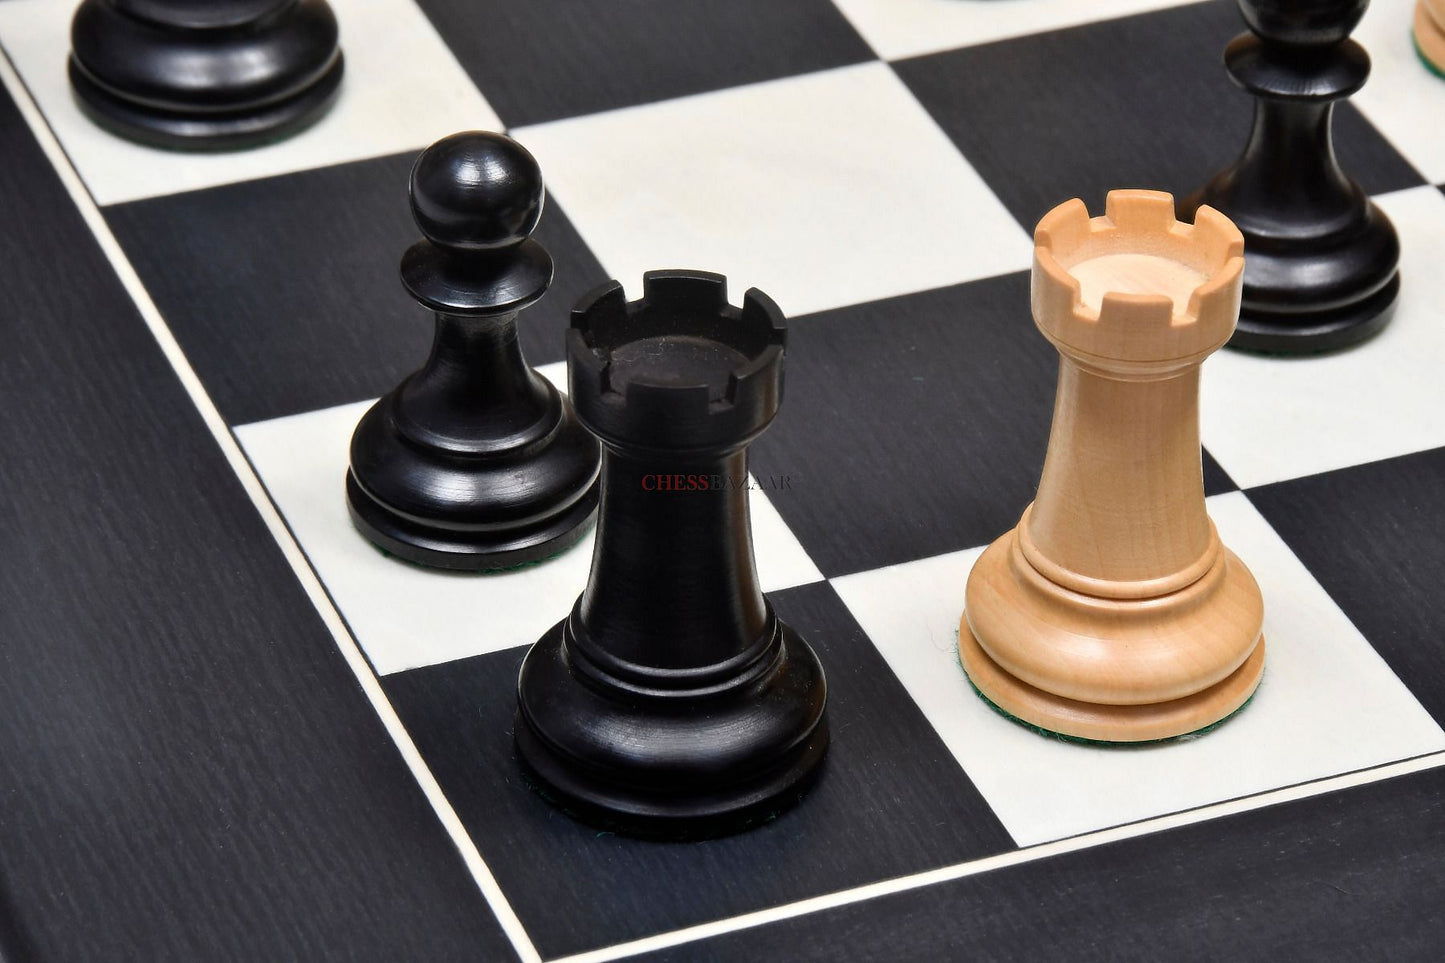 The Professional Series Tournament Staunton Weighted Chess Pieces in Ebonized and Boxwood - 3.8" King